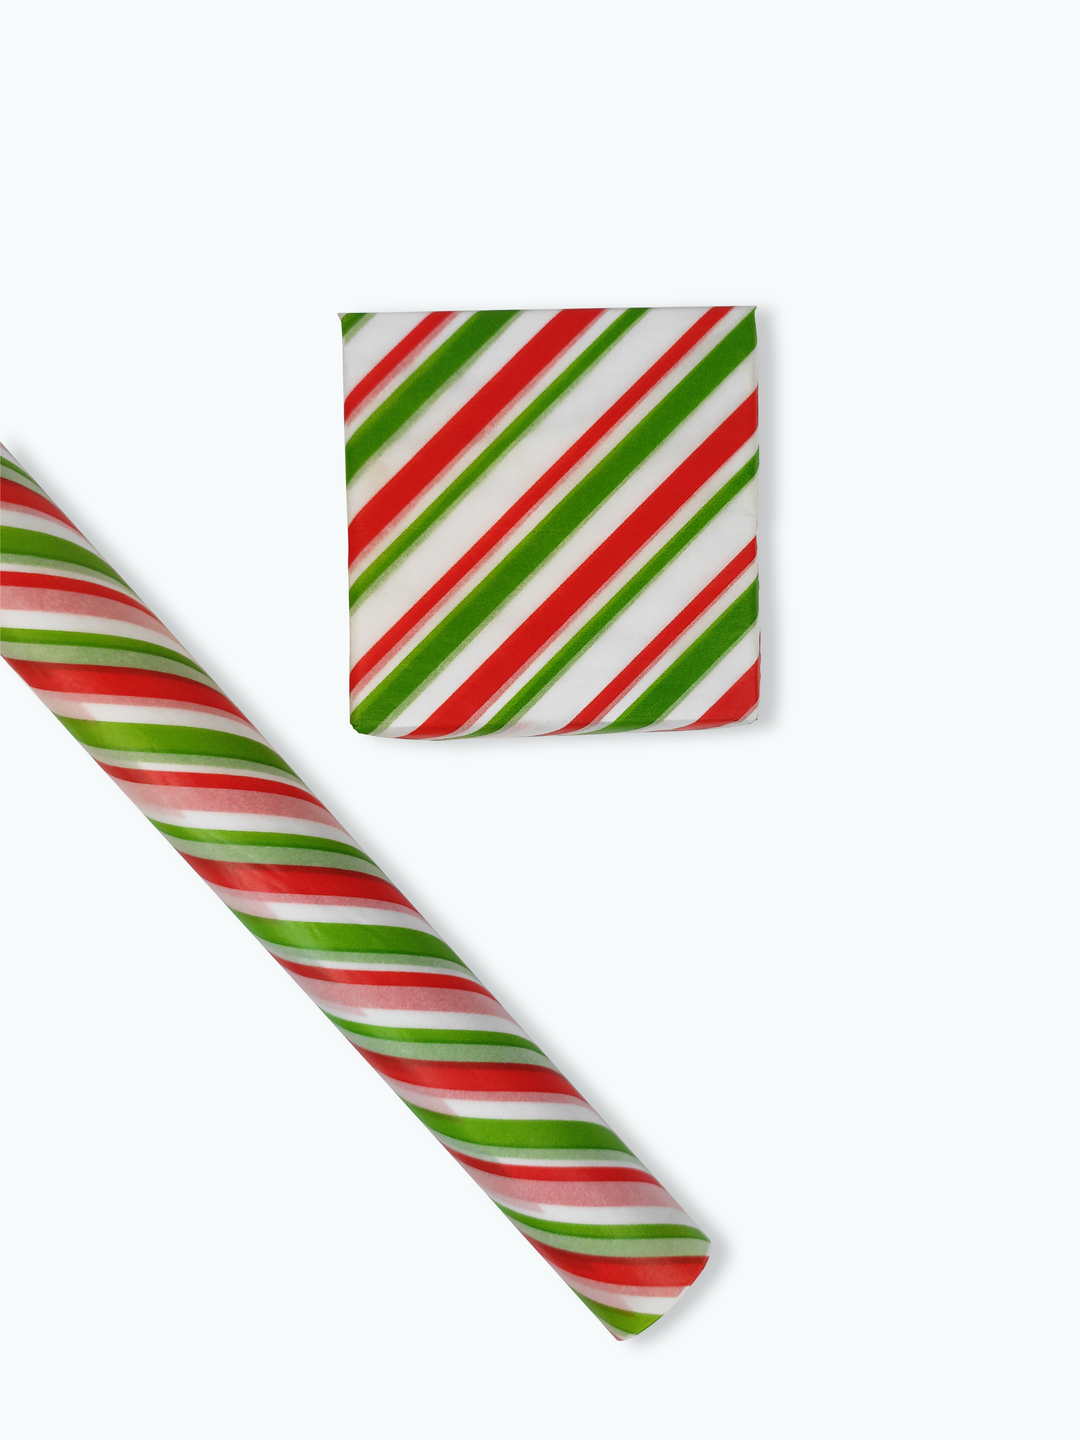 wrapping paper | tissue paper | custom wrapping paper | custom tissue paper | coloured tissue paper | tissue paper roll | design tissue paper | eco friendly tissue paper | compostable tissue paper | candy cane tissue paper